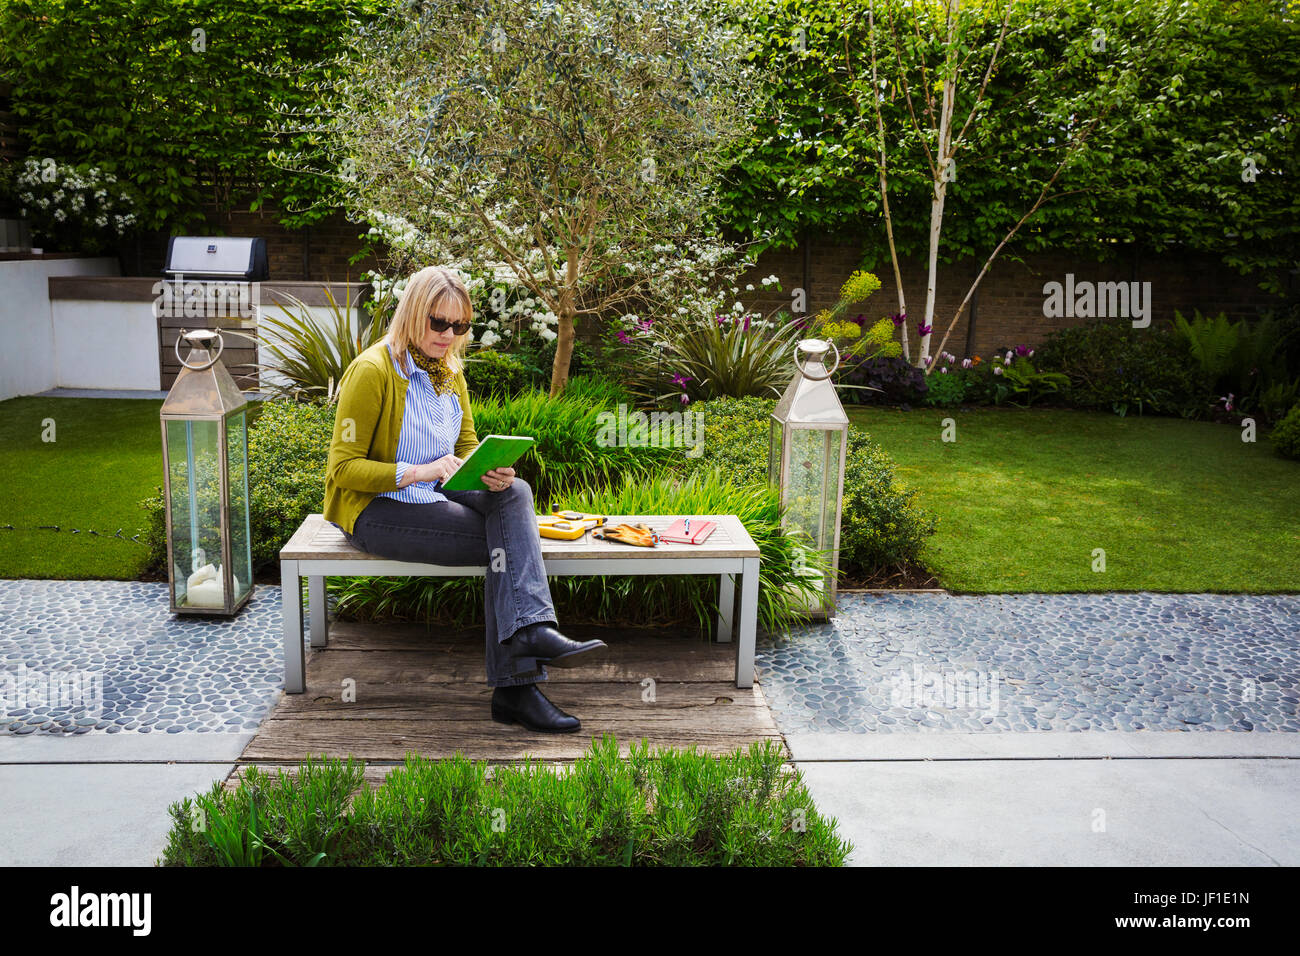 Woman sitting on a bench in a garden, drawing flowers in a sketchbook. Stock Photo